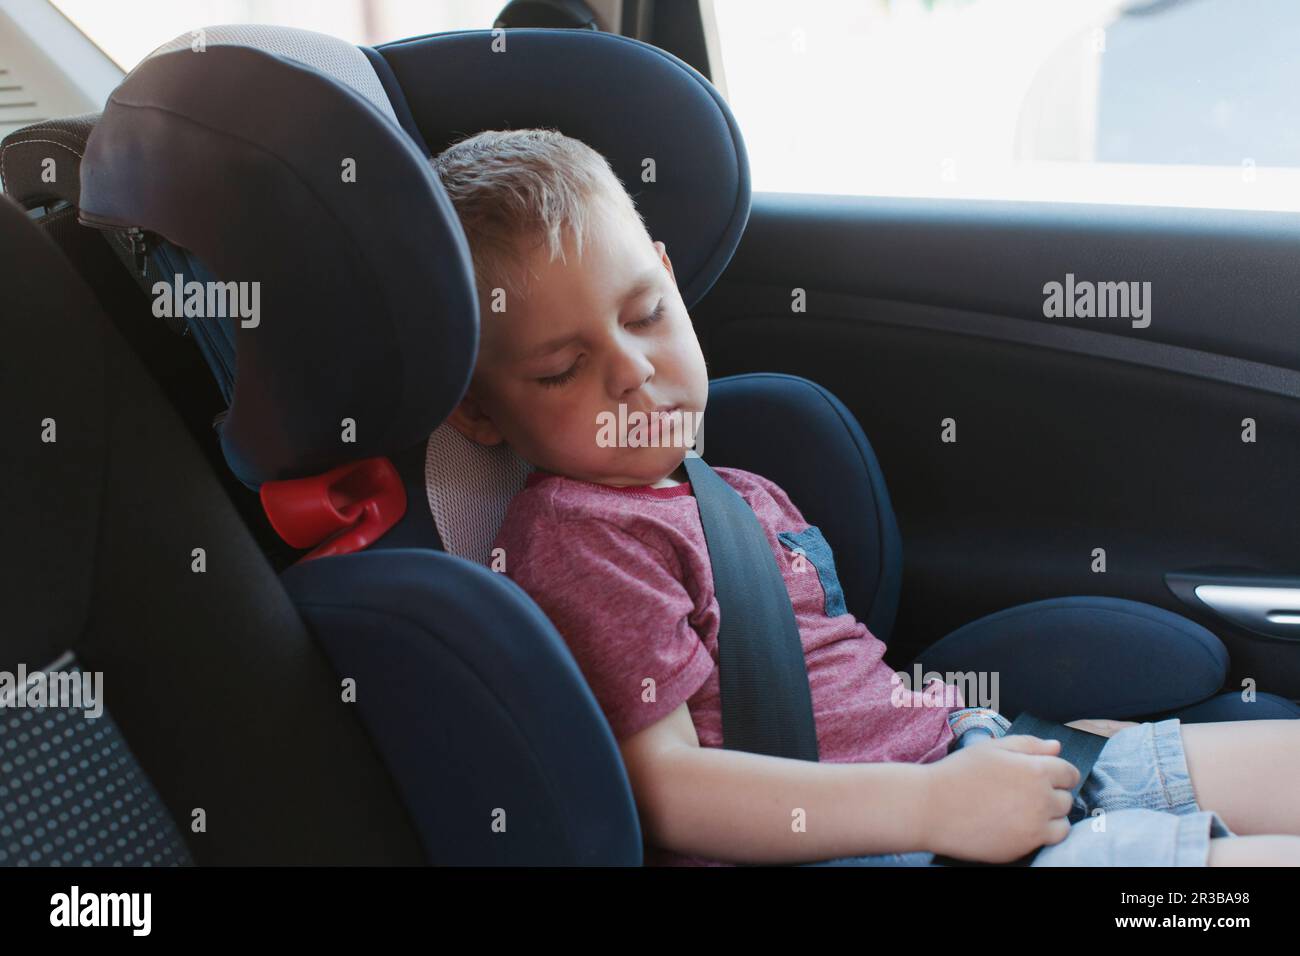 Boy sleeping on safety seat in car Stock Photo